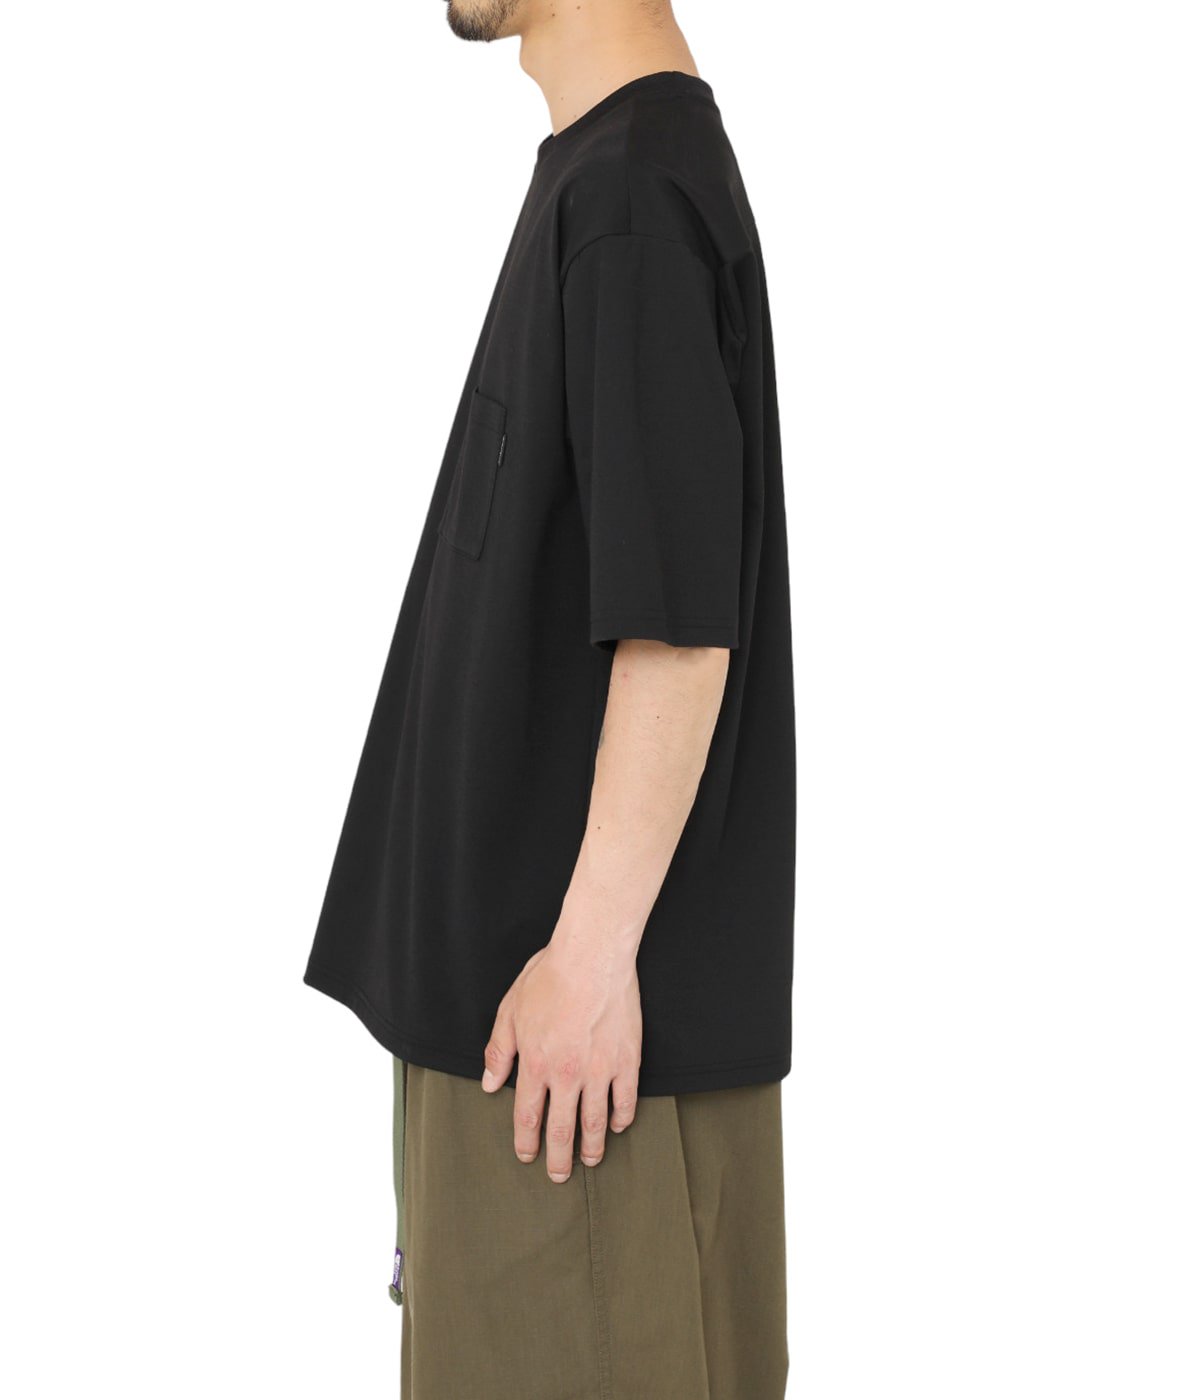 S/S Airy Pocket Tee | THE NORTH FACE(ザ ノースフェイス) / トップス